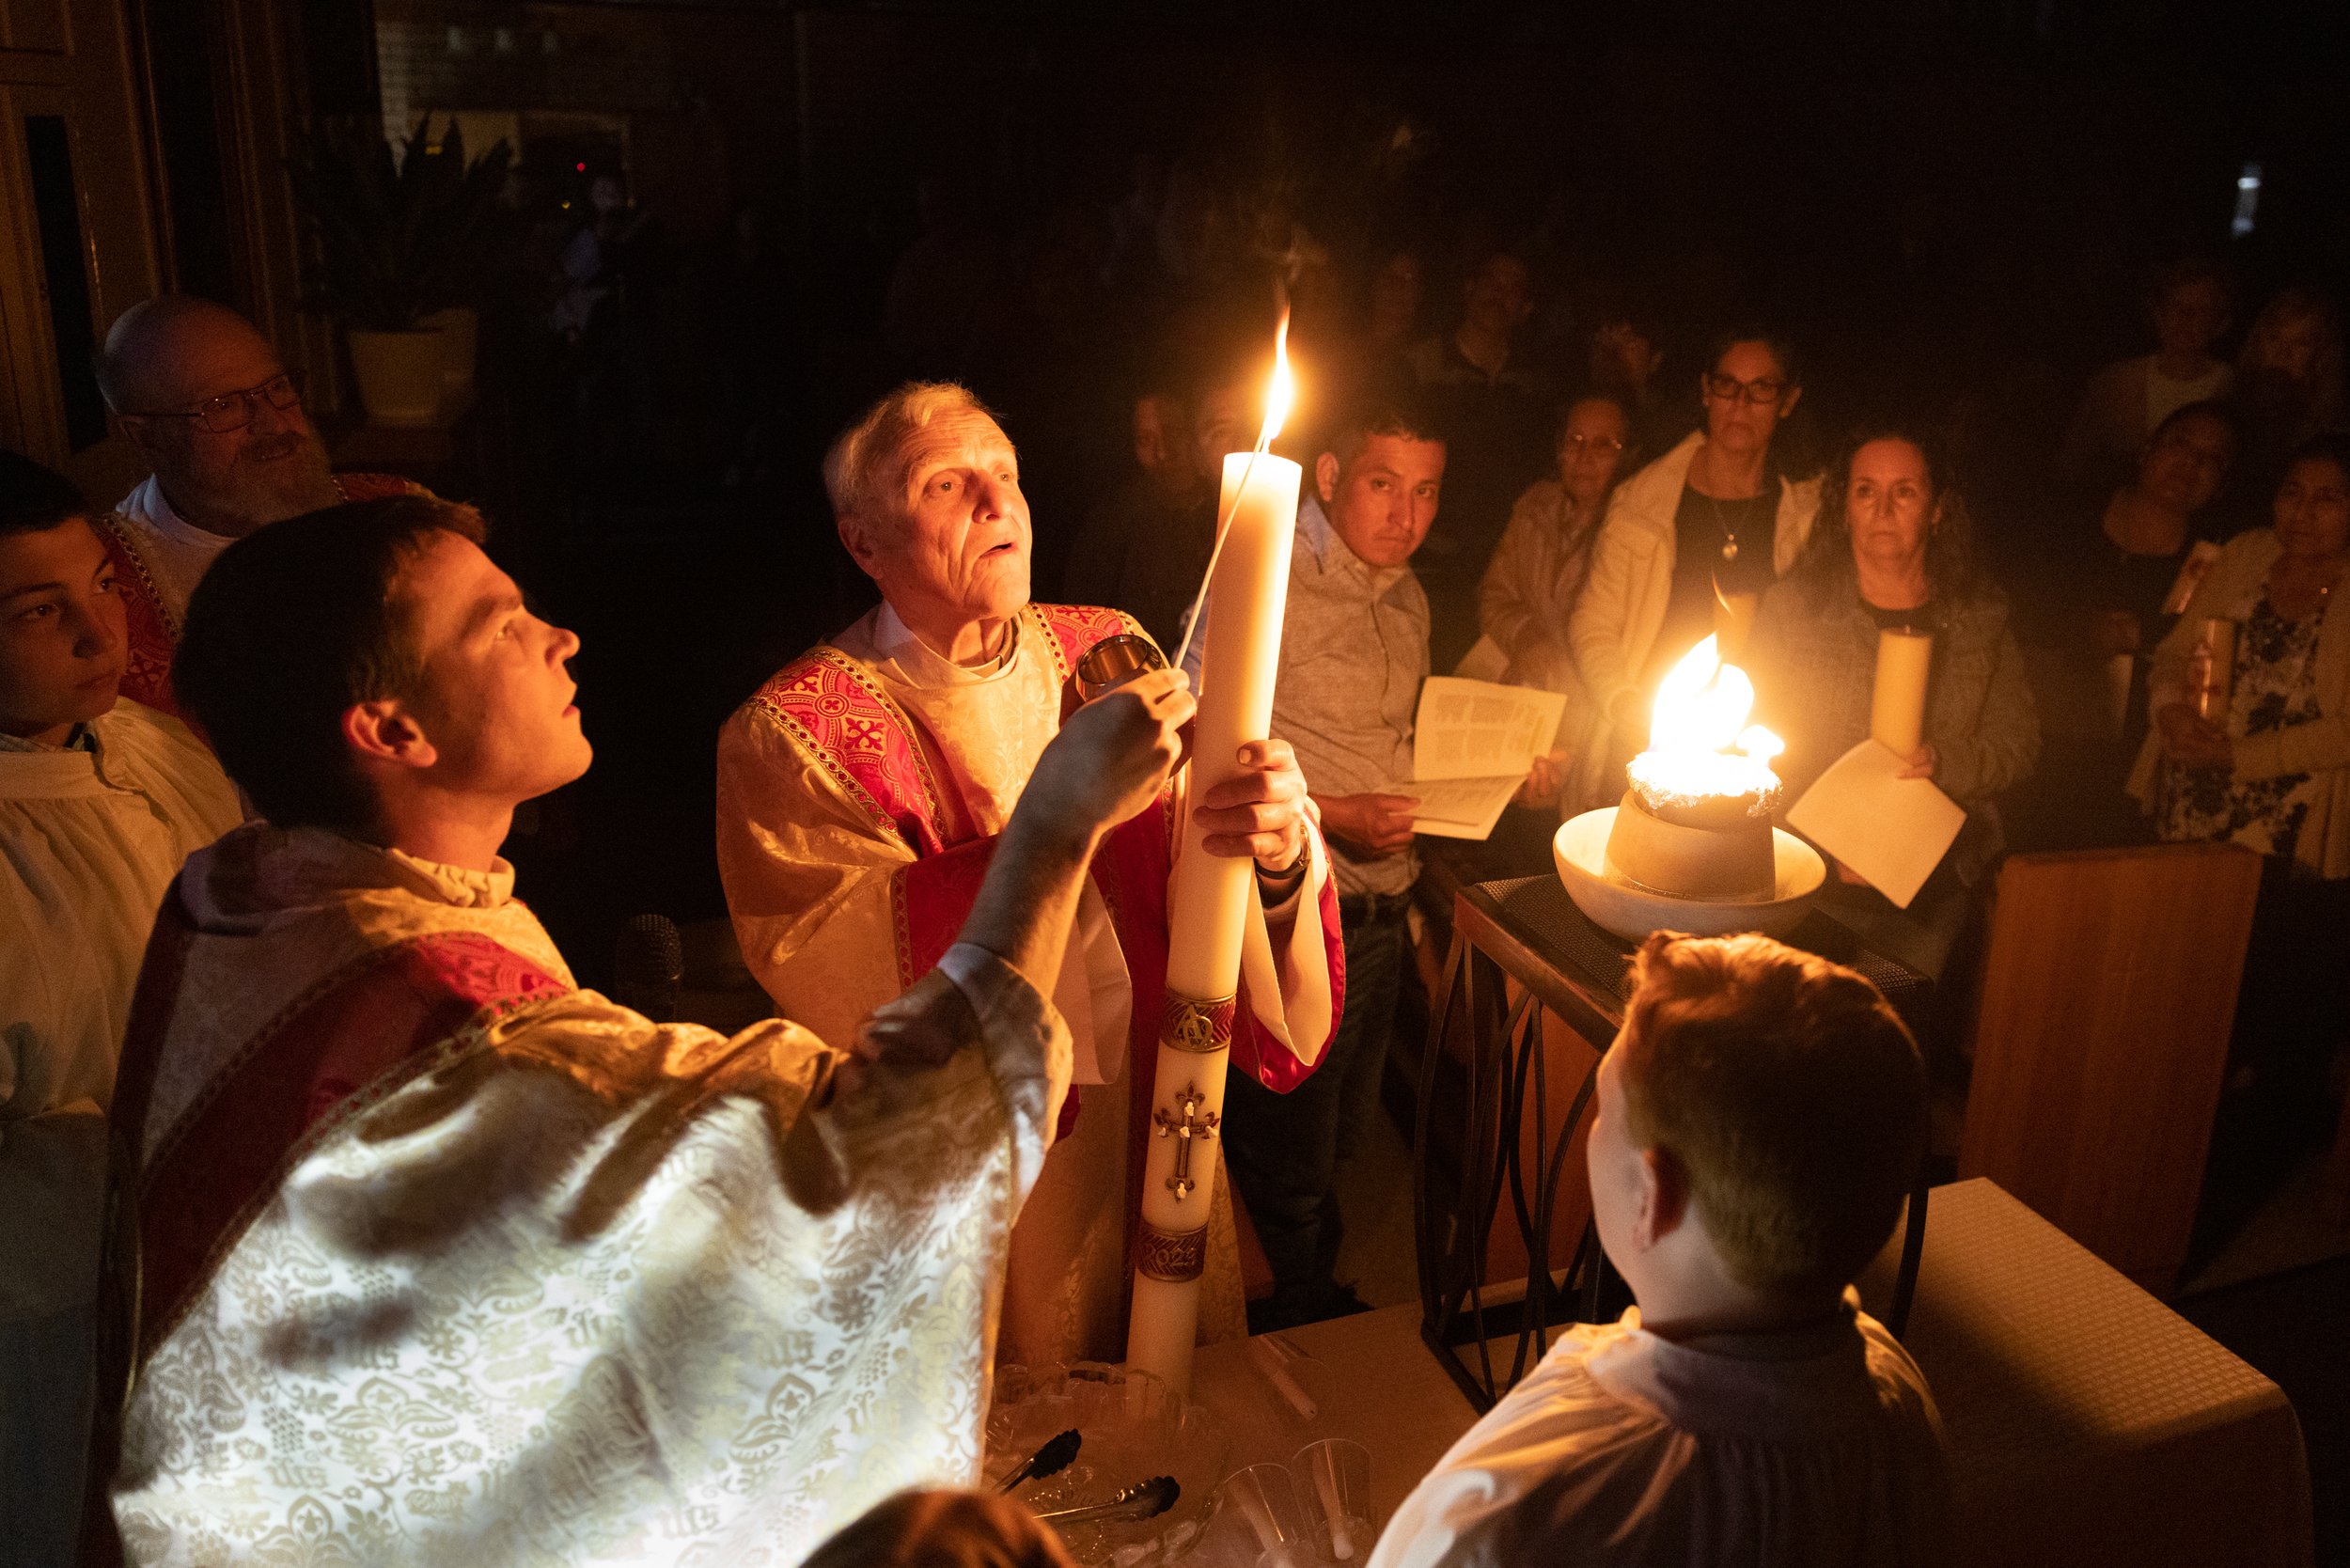  Father Tom Vordtriede lit a paschal candle held by Deacon Ray Burle at the start of the Easter Vigil on Saturday, April 8, 2023, at Holy Rosary Parish in Warrenton, Missouri. At the Mass, 24 people from the parish were received into the Catholic Chu